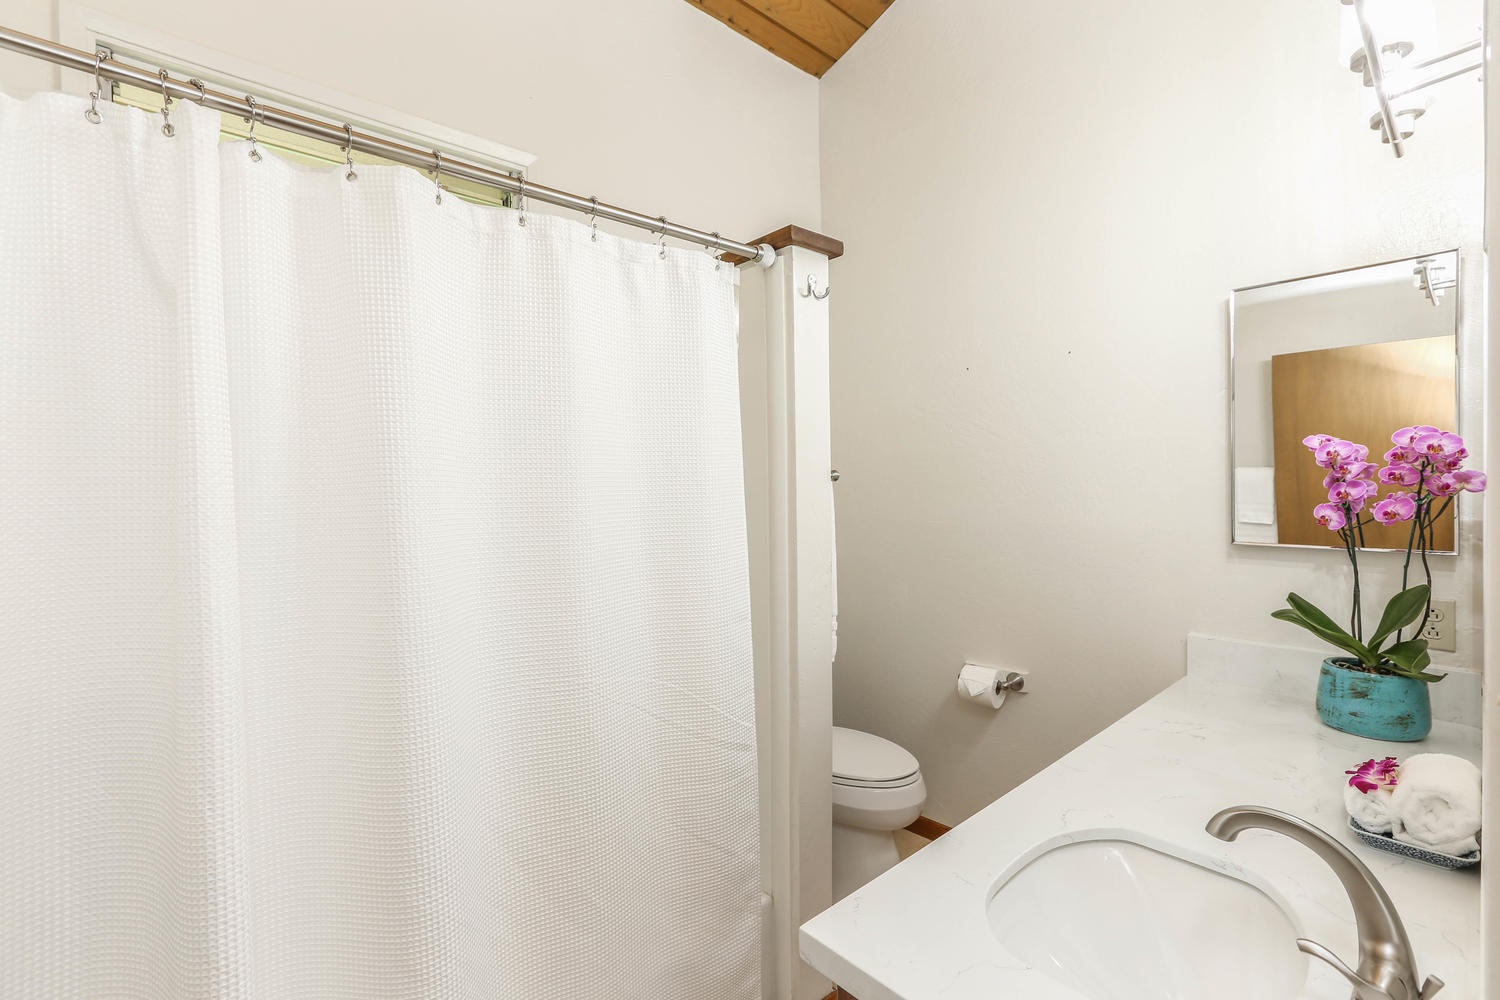 Hanalei Vacation Rentals, Hallor House TVNC #5147 - Guest bathroom with tub